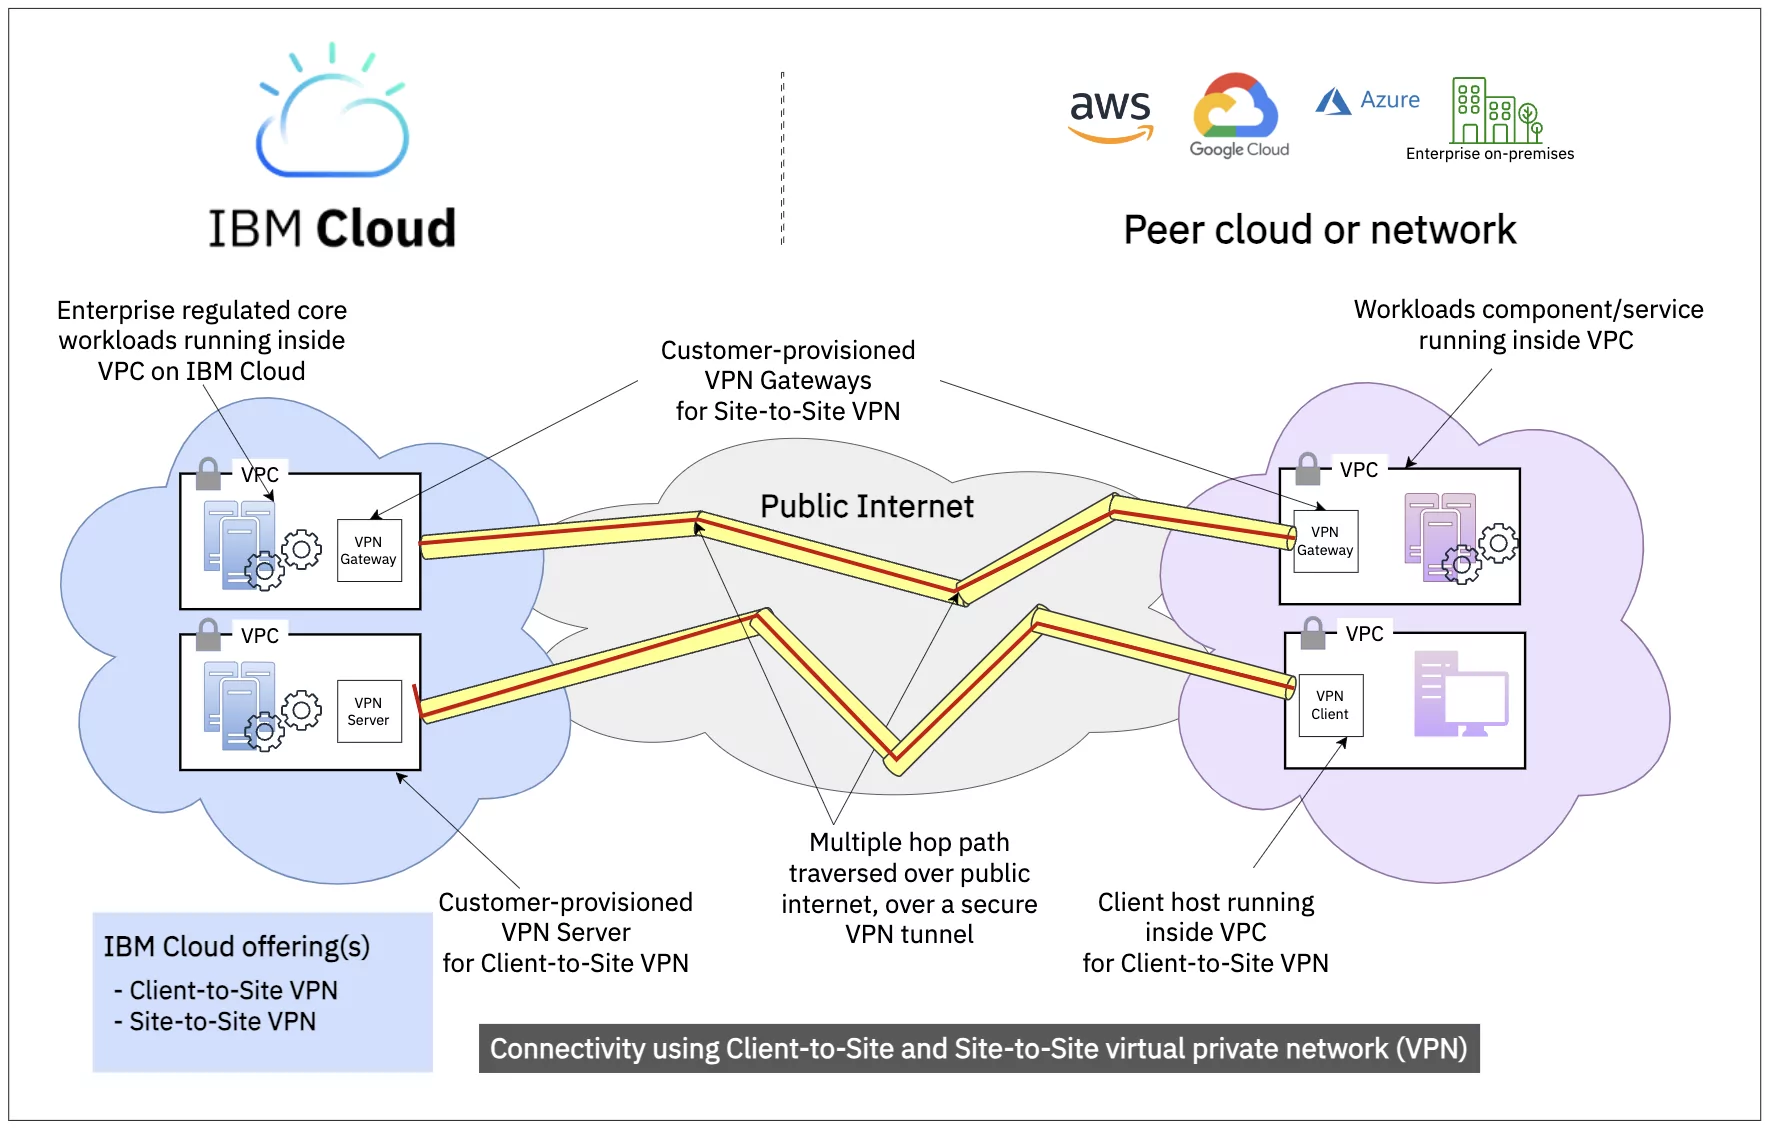 Figure 5: High-level view of the cloud-to-cloud connectivity between IBM Cloud and other peer cloud using virtual private networks (VPNs).